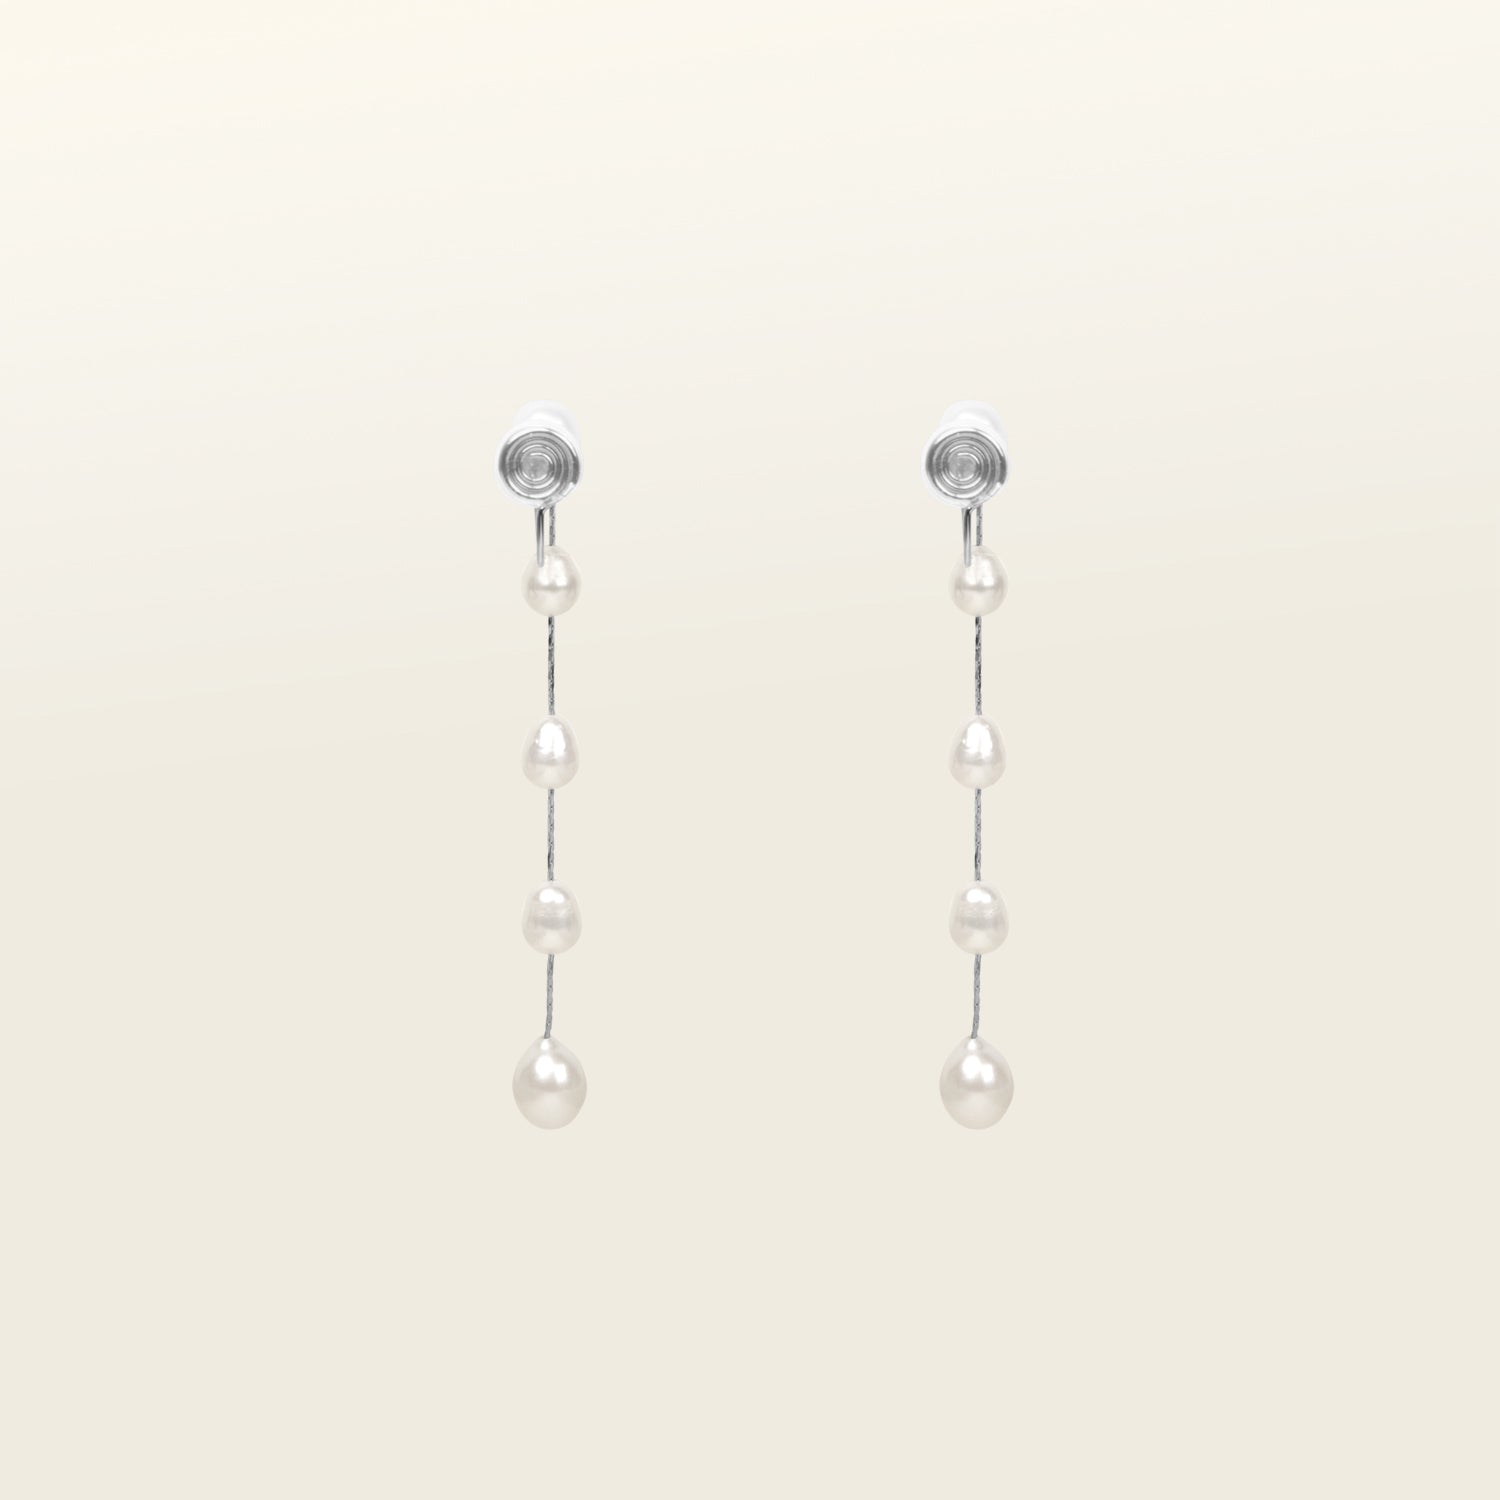 Image of the Lune Pearl Clip-On Earrings in Silver with ease and comfort. Their Mosquito Coil Clip-Ons feature a medium secure hold that can be adjusted to any ear size, shape, and sensitivity-level. Crafted from Freshwater Pearls, each set exhibits its own unique color and size for a one-of-a-kind look. Long-lasting design ensures it can be worn for up to 24 hours with ease.